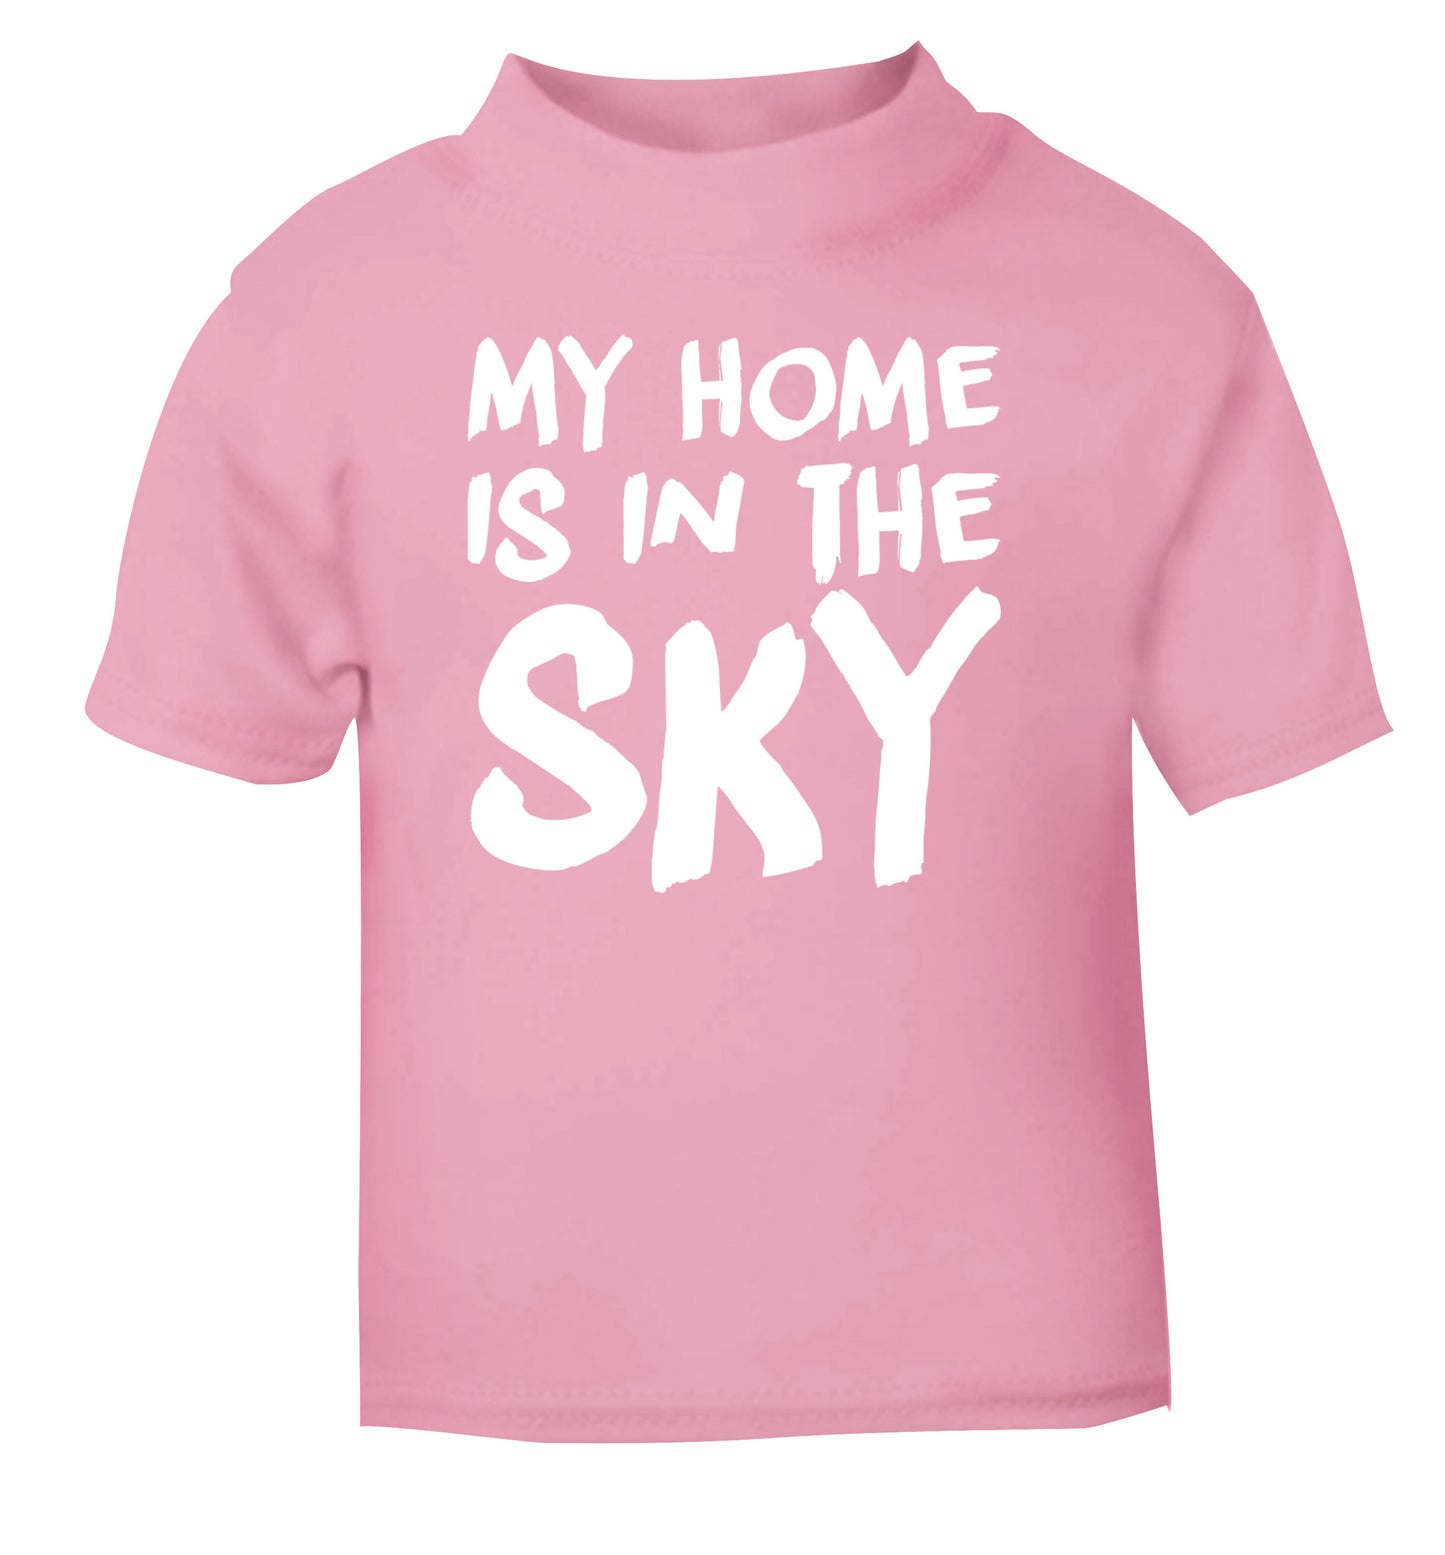 My home is in the sky light pink Baby Toddler Tshirt 2 Years